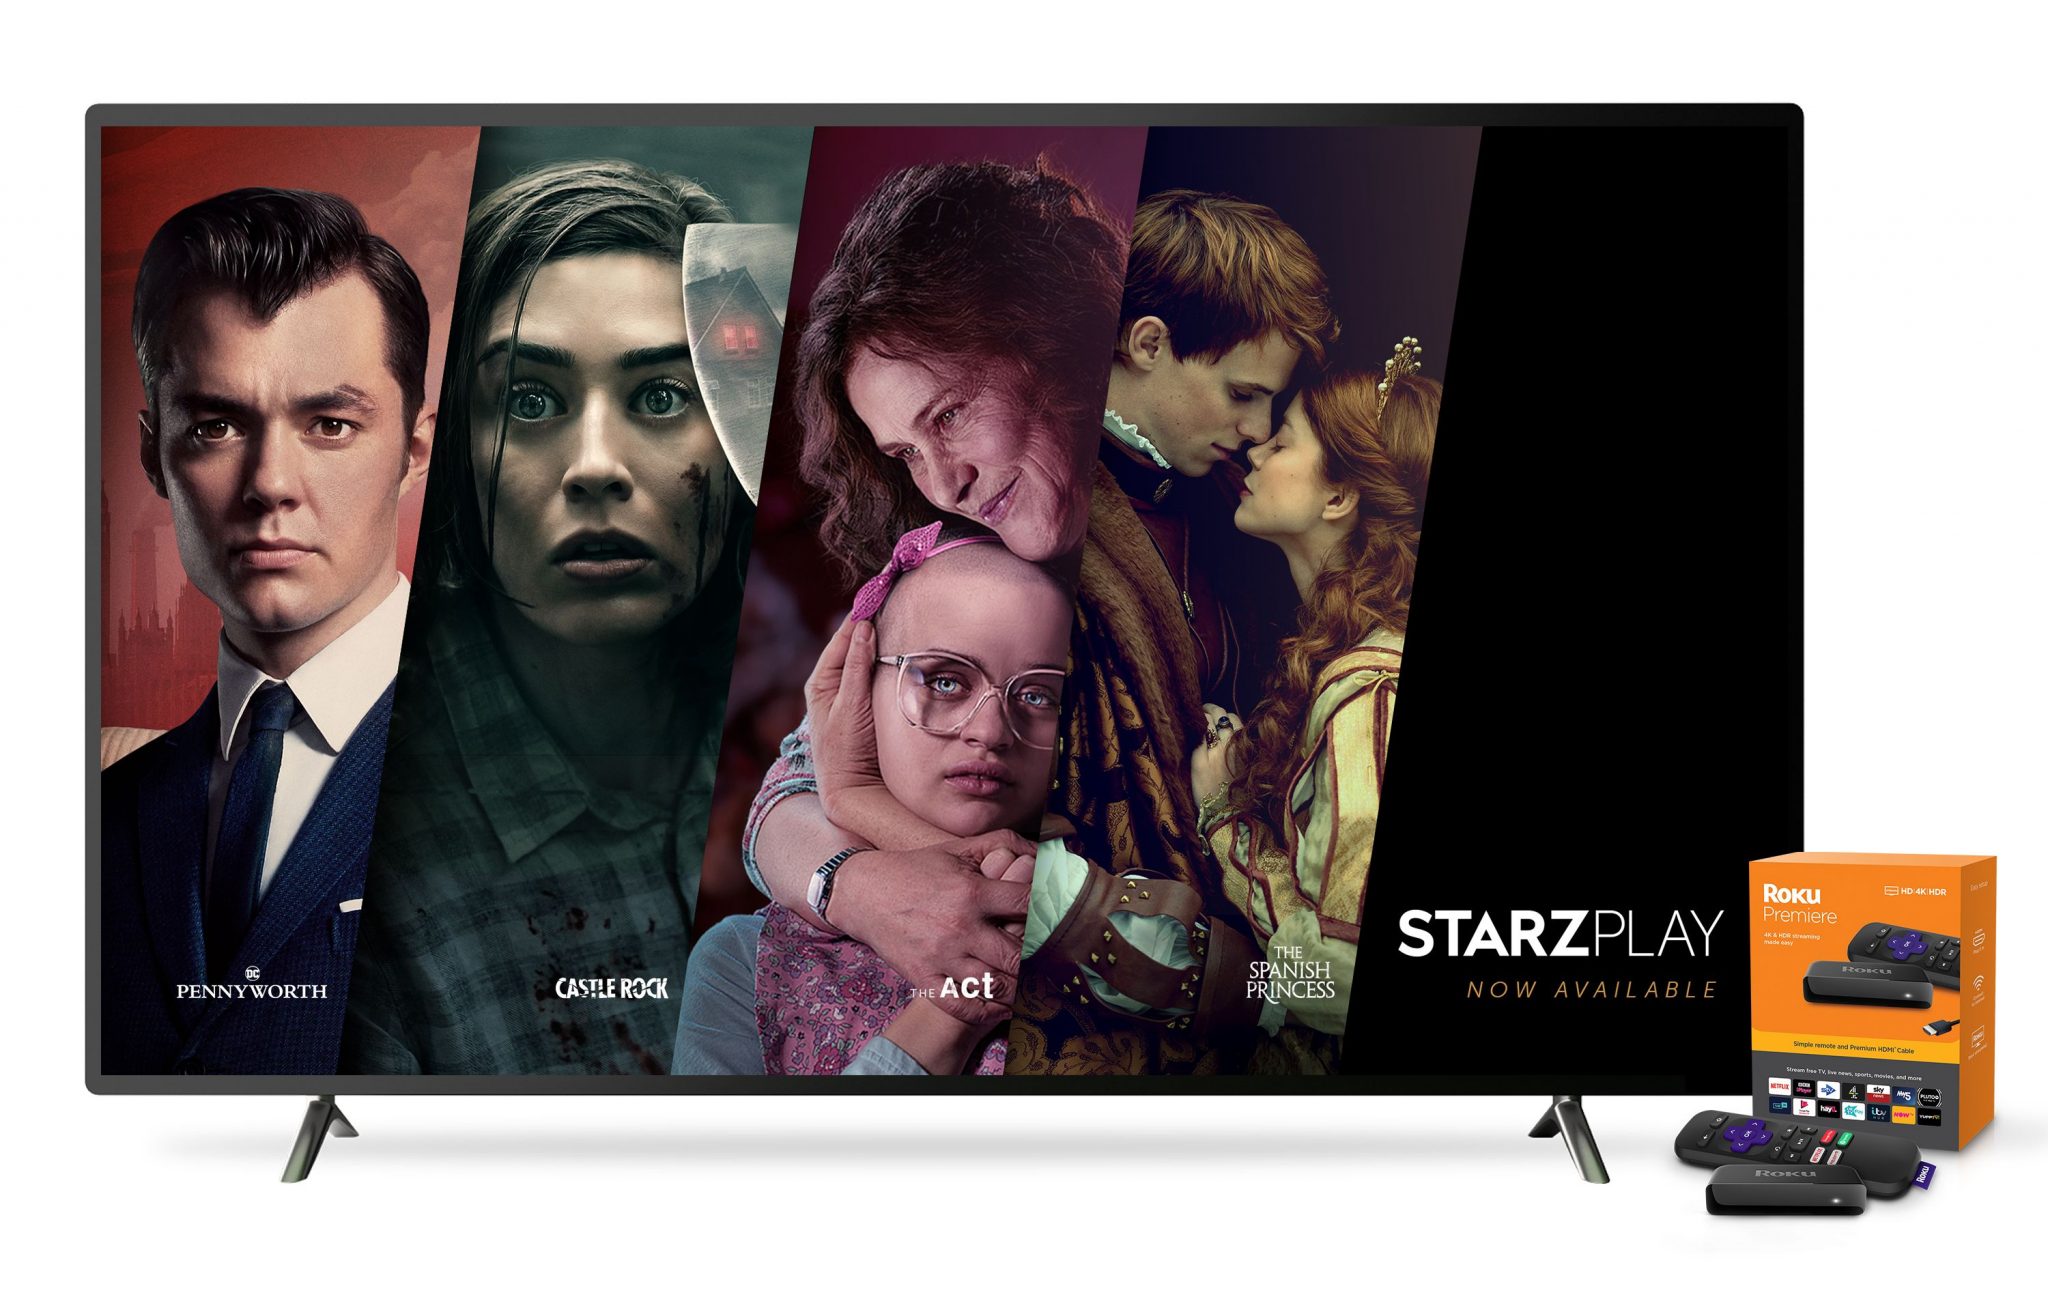 How To Watch Starz On Smart TV